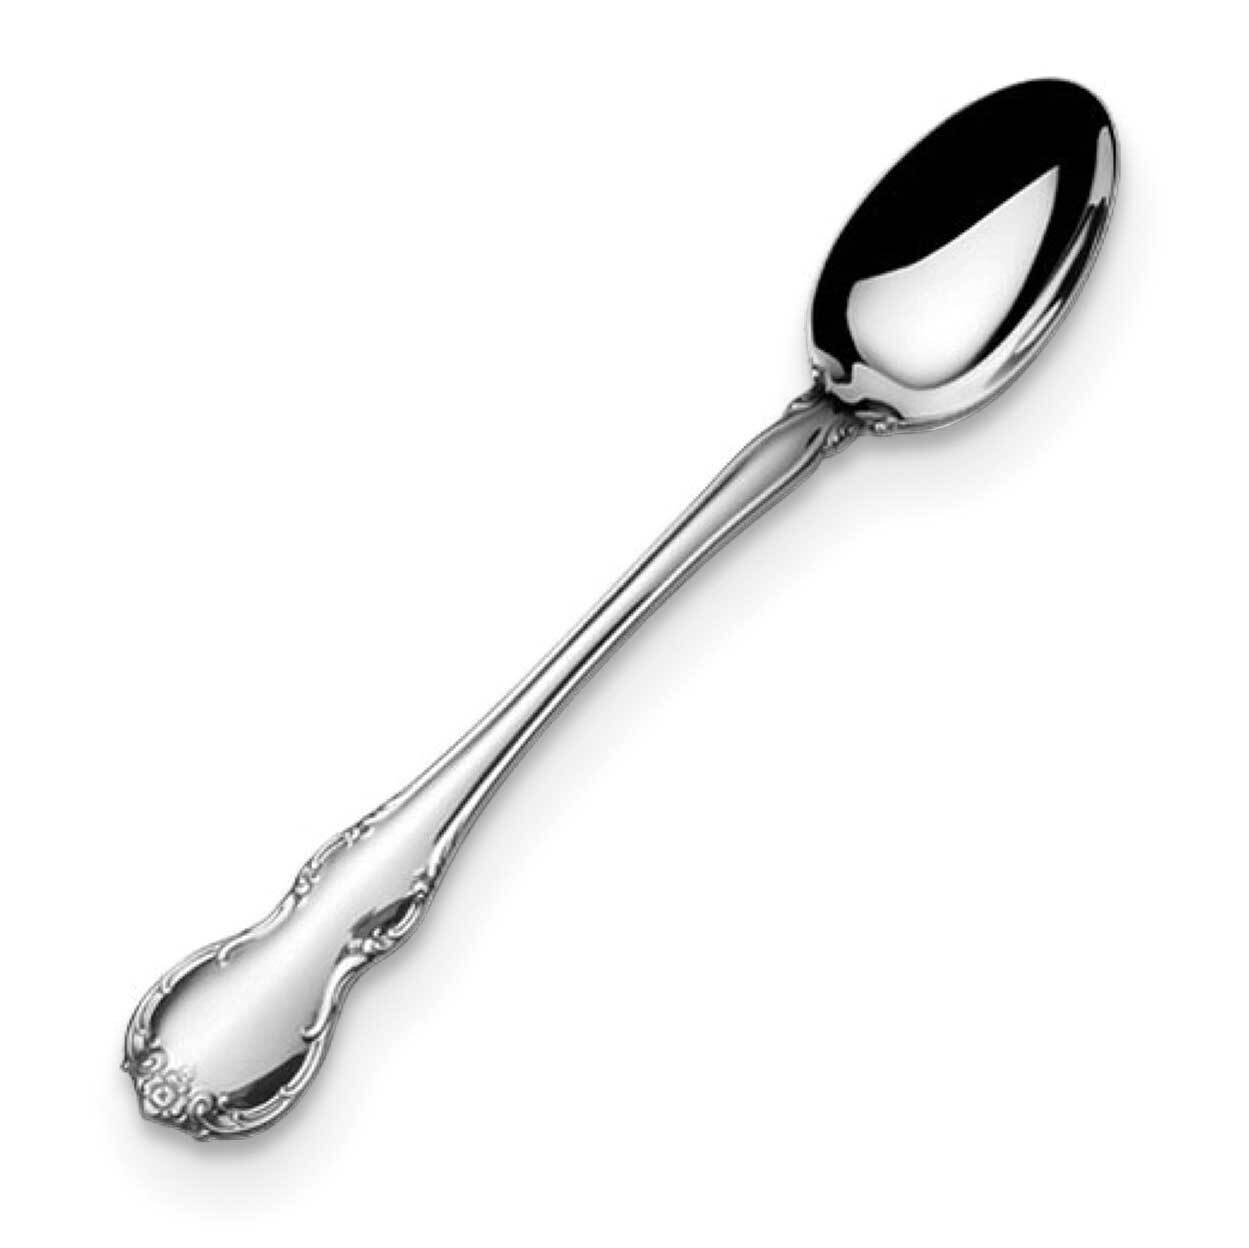 Towle French Provincial Sterling Silver Infant Feeding Spoon GM21979